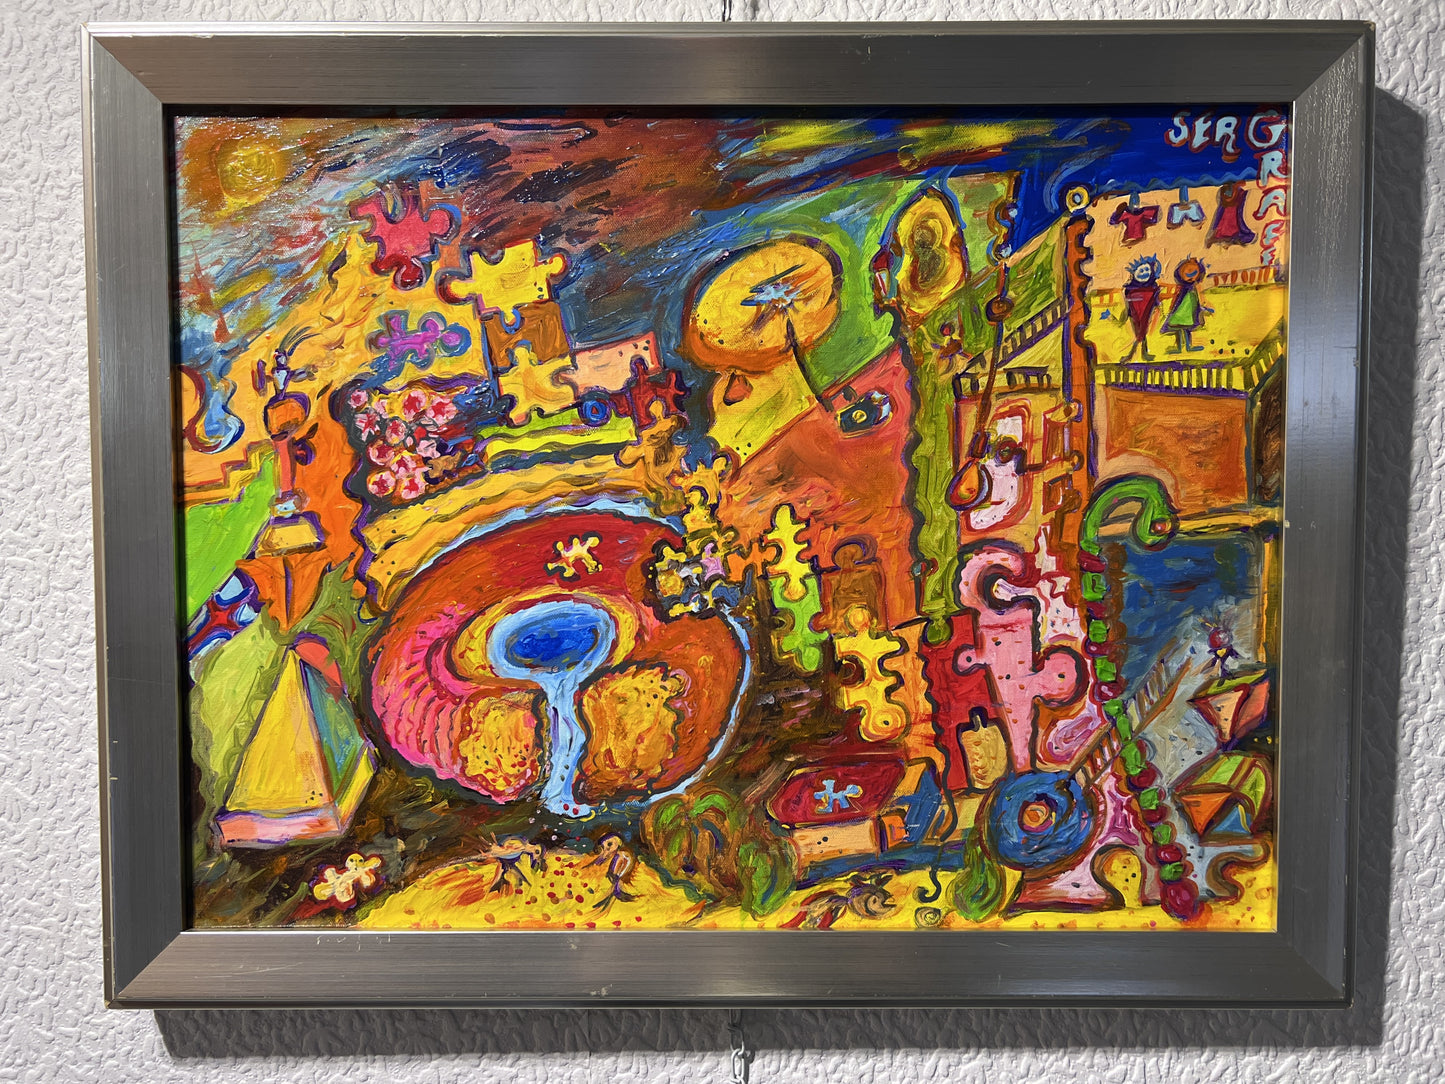 One-Of- A-Kind Abstract Painting on Canvas by Serg Graff "Donut" Framed, COA